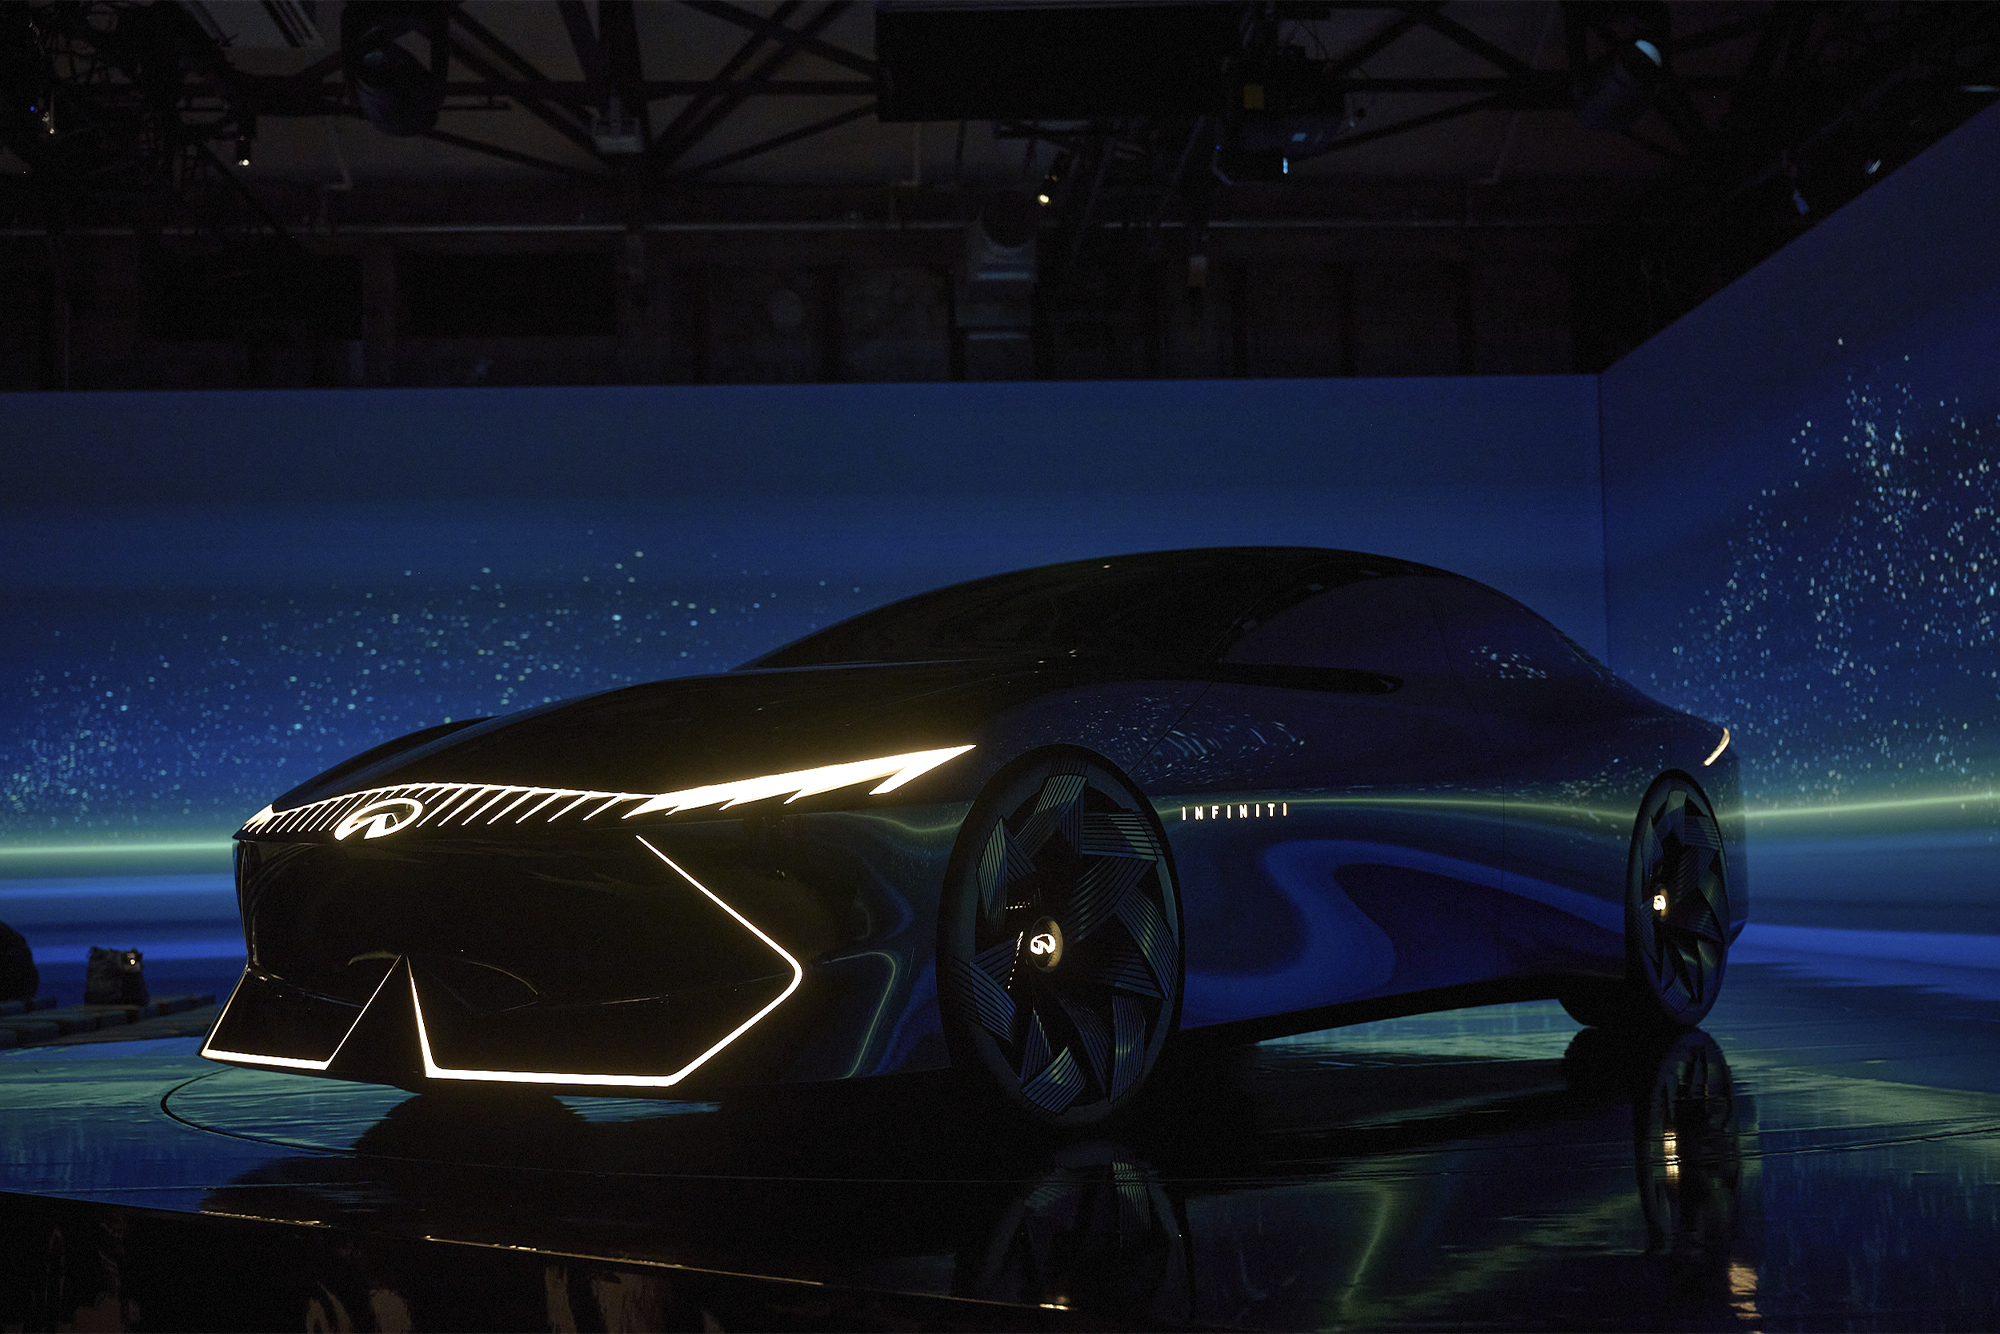 Infiniti Vision Qe on stage with blue and green lighting